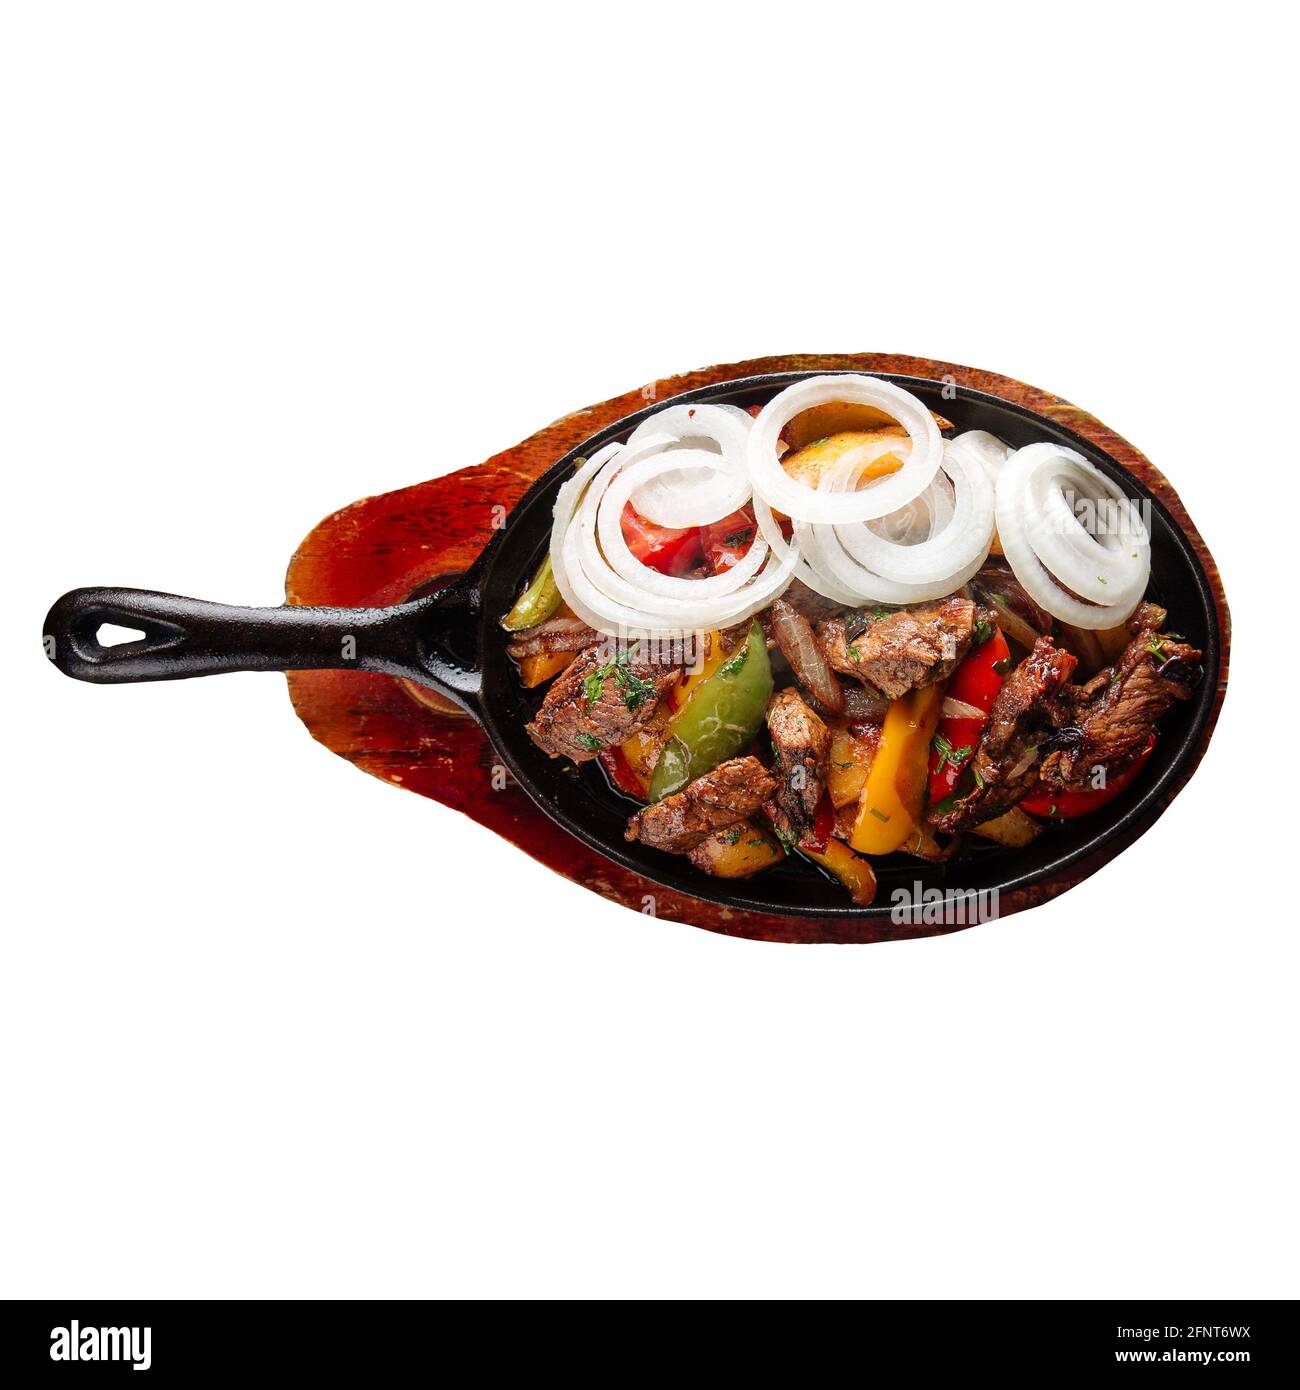 Isolated roast meat and vegetables Stock Photo